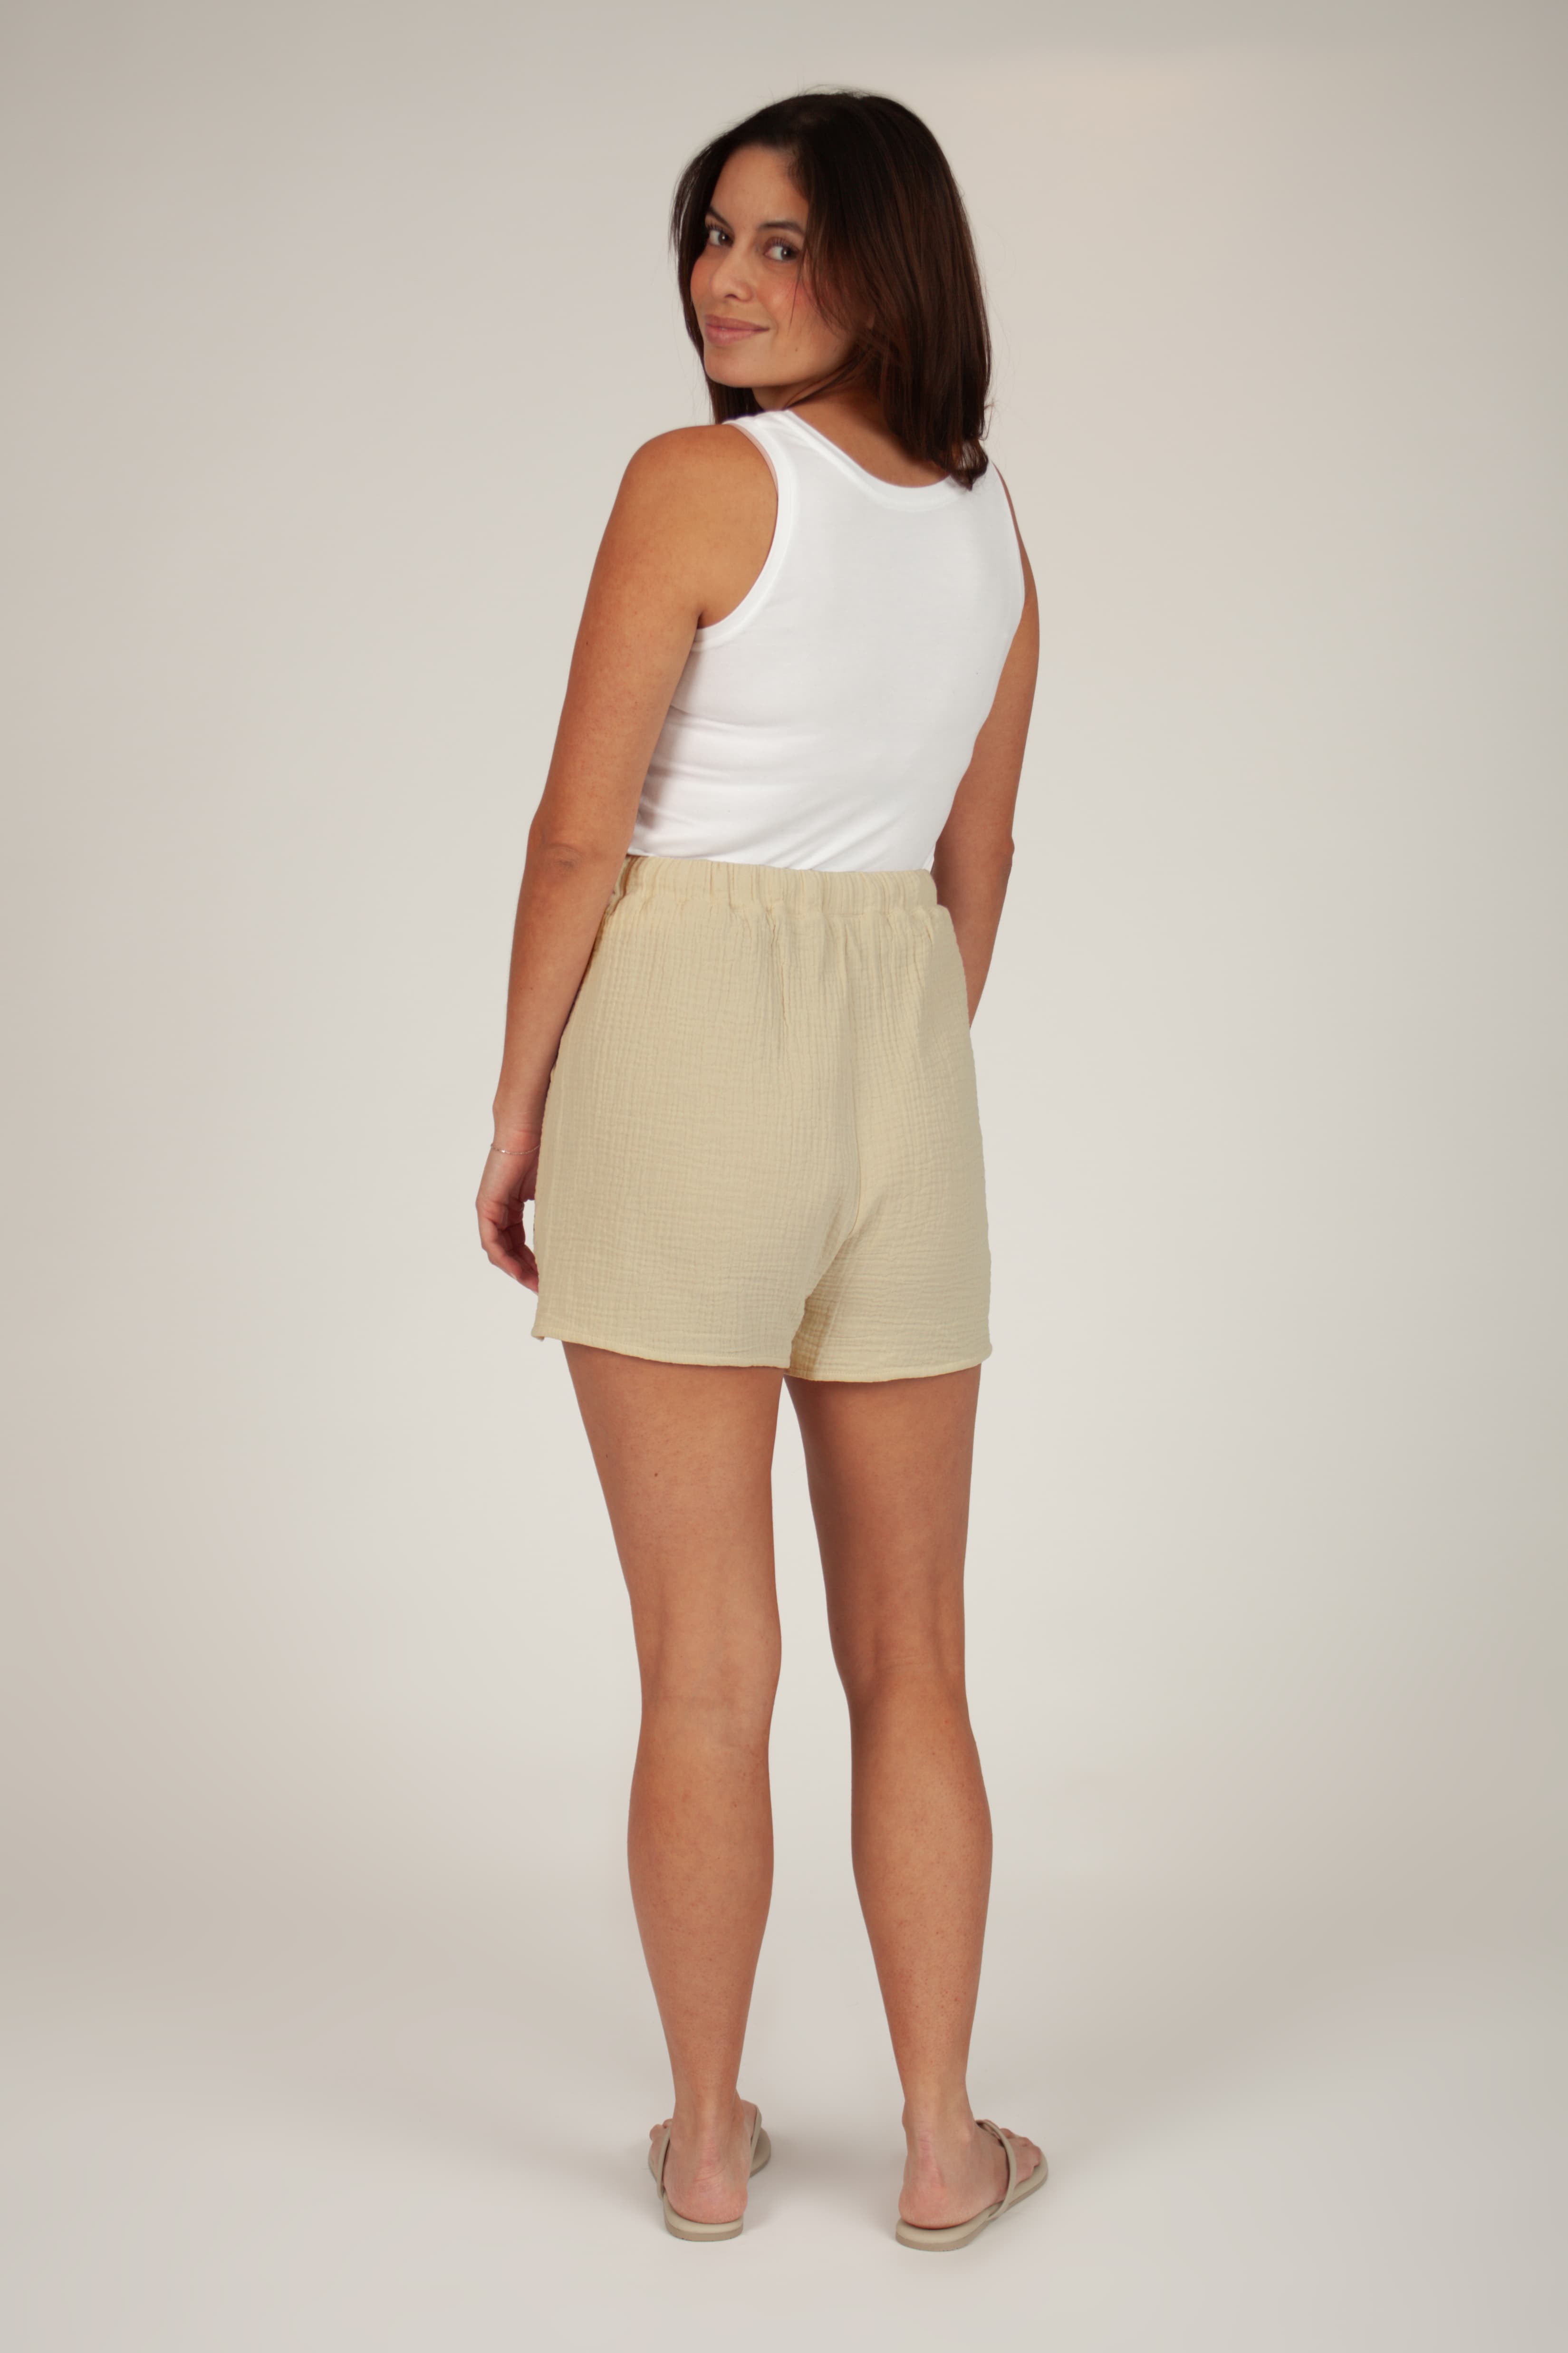 Lightweight Cotton Gauze shorts in pale olive grey